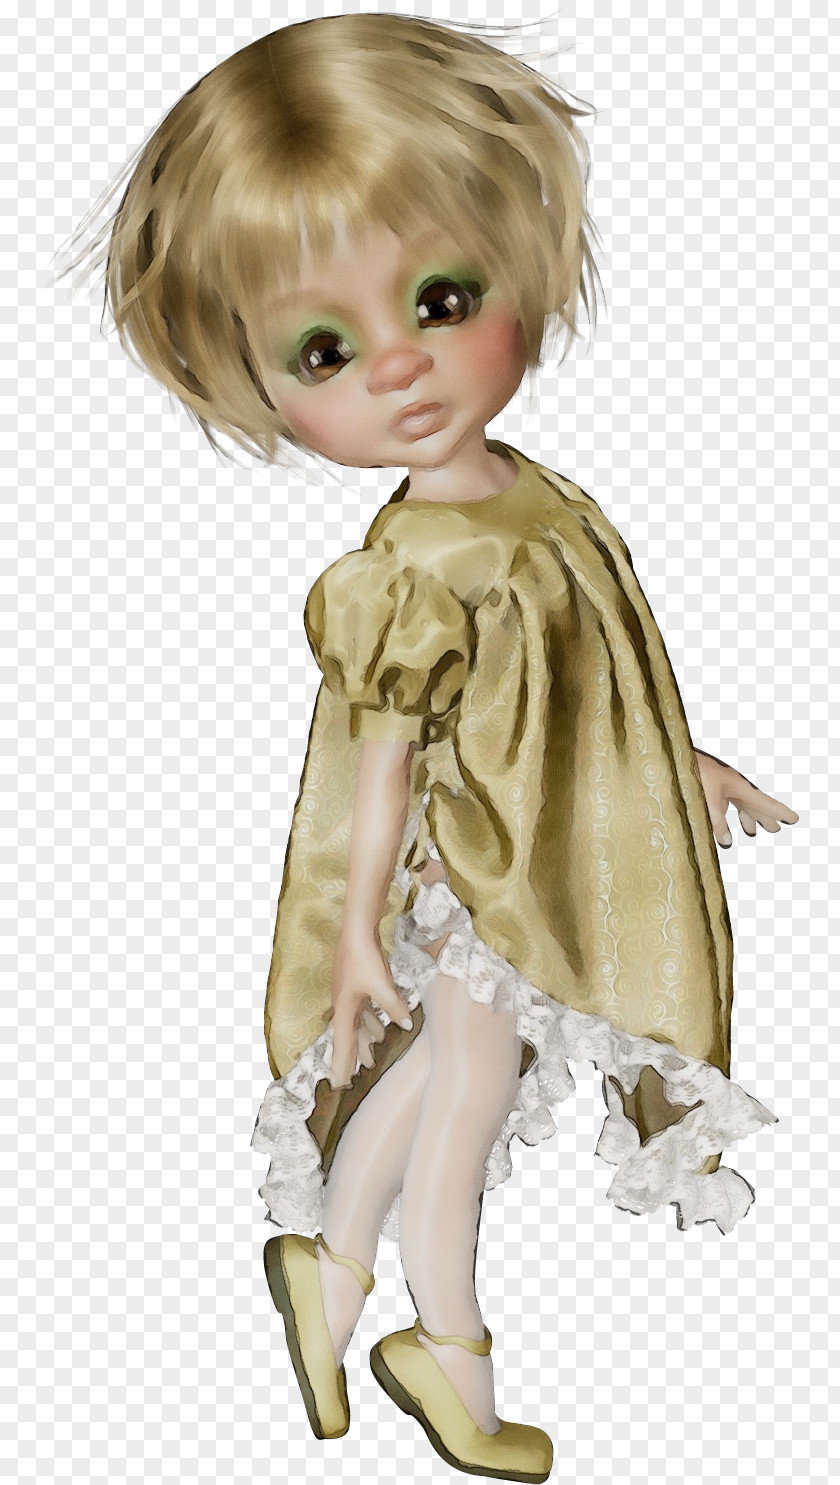 Doll Toy Figurine Wig Costume PNG